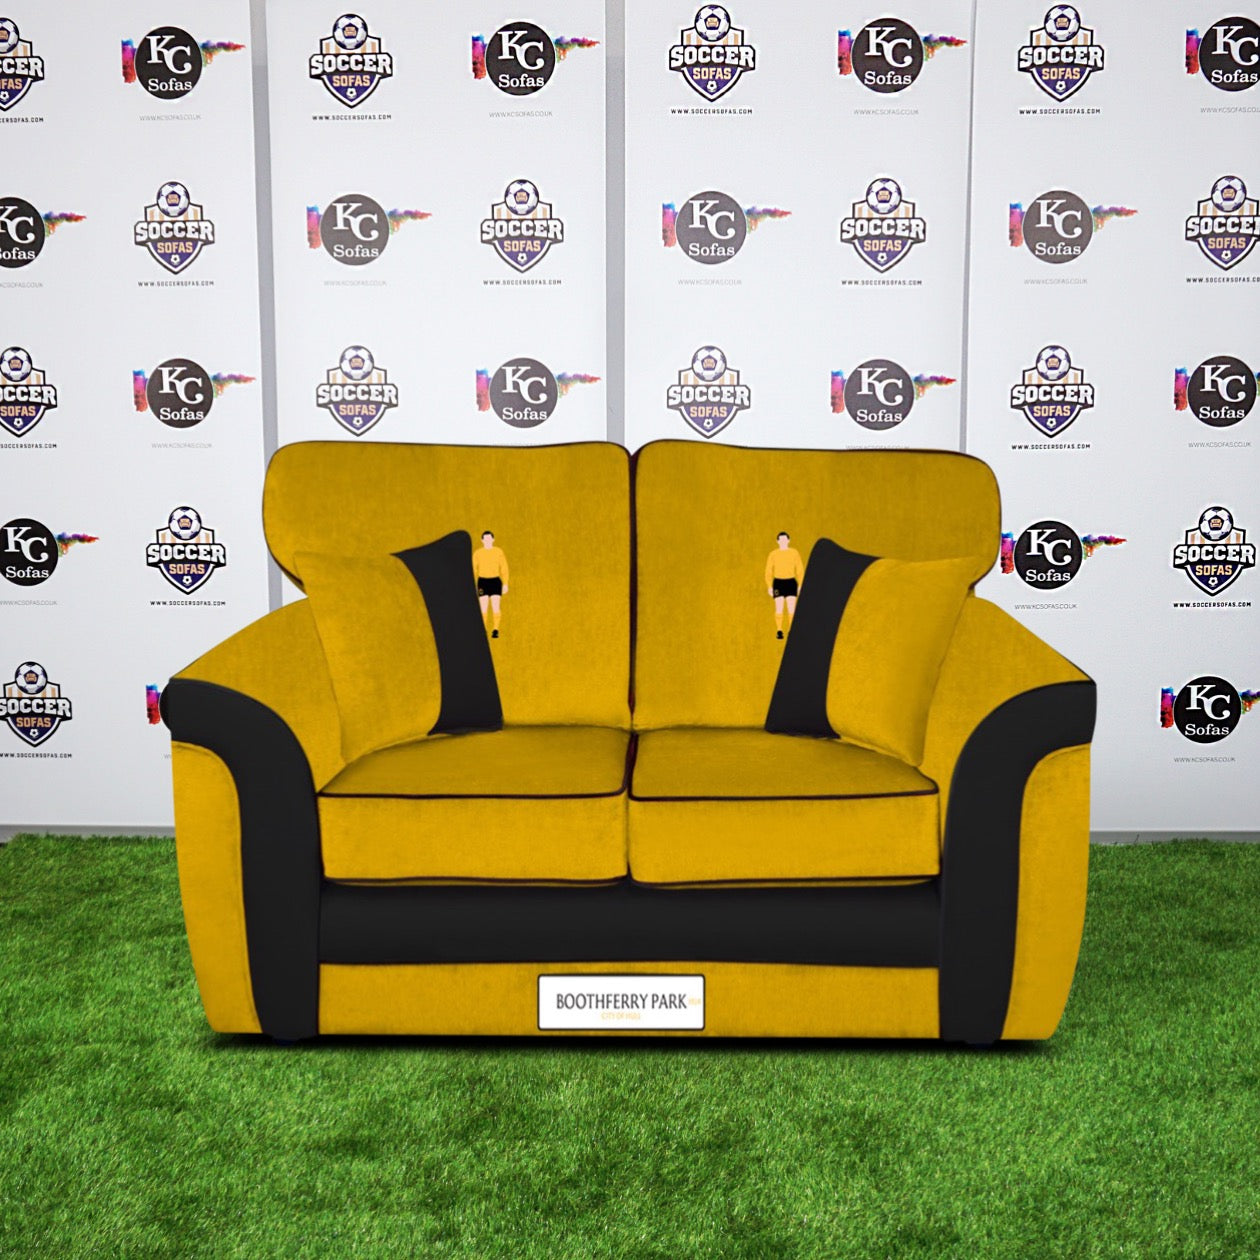 Boothferry Park 2 Seater Sofa (Hull FC)